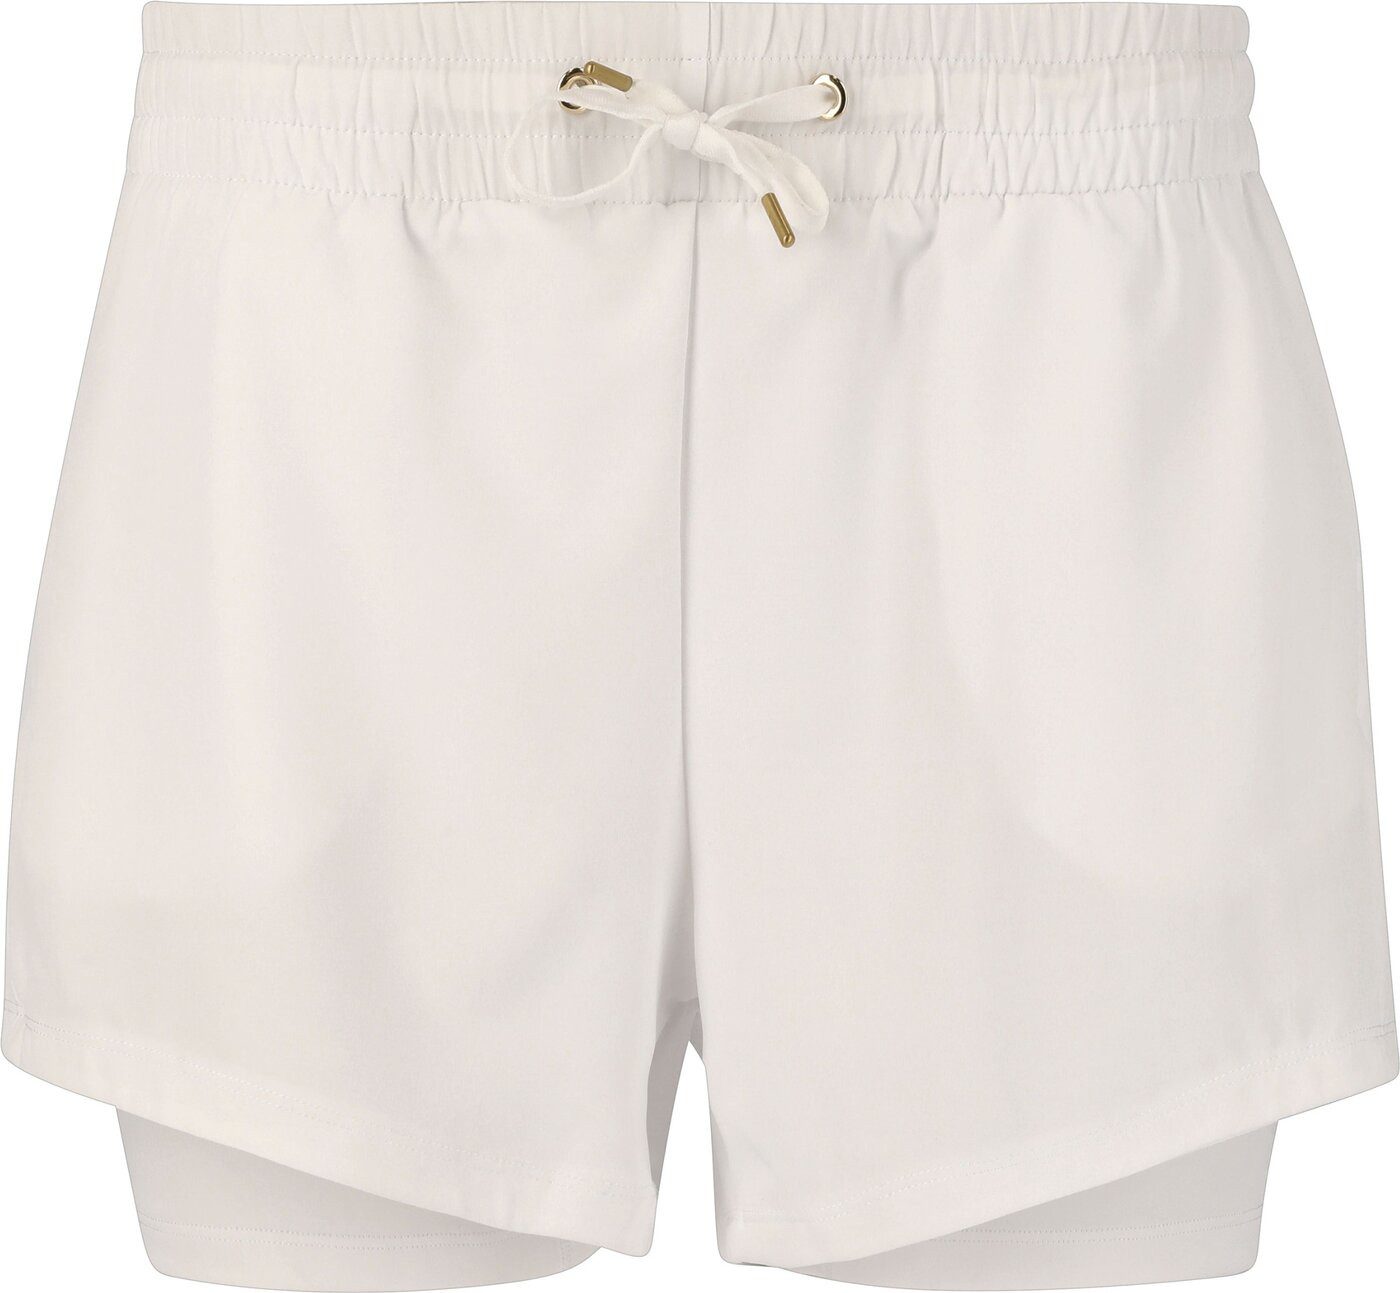 ATHLECIA Shorts Timmie V2 W 2-In-1 Shorts WHITE